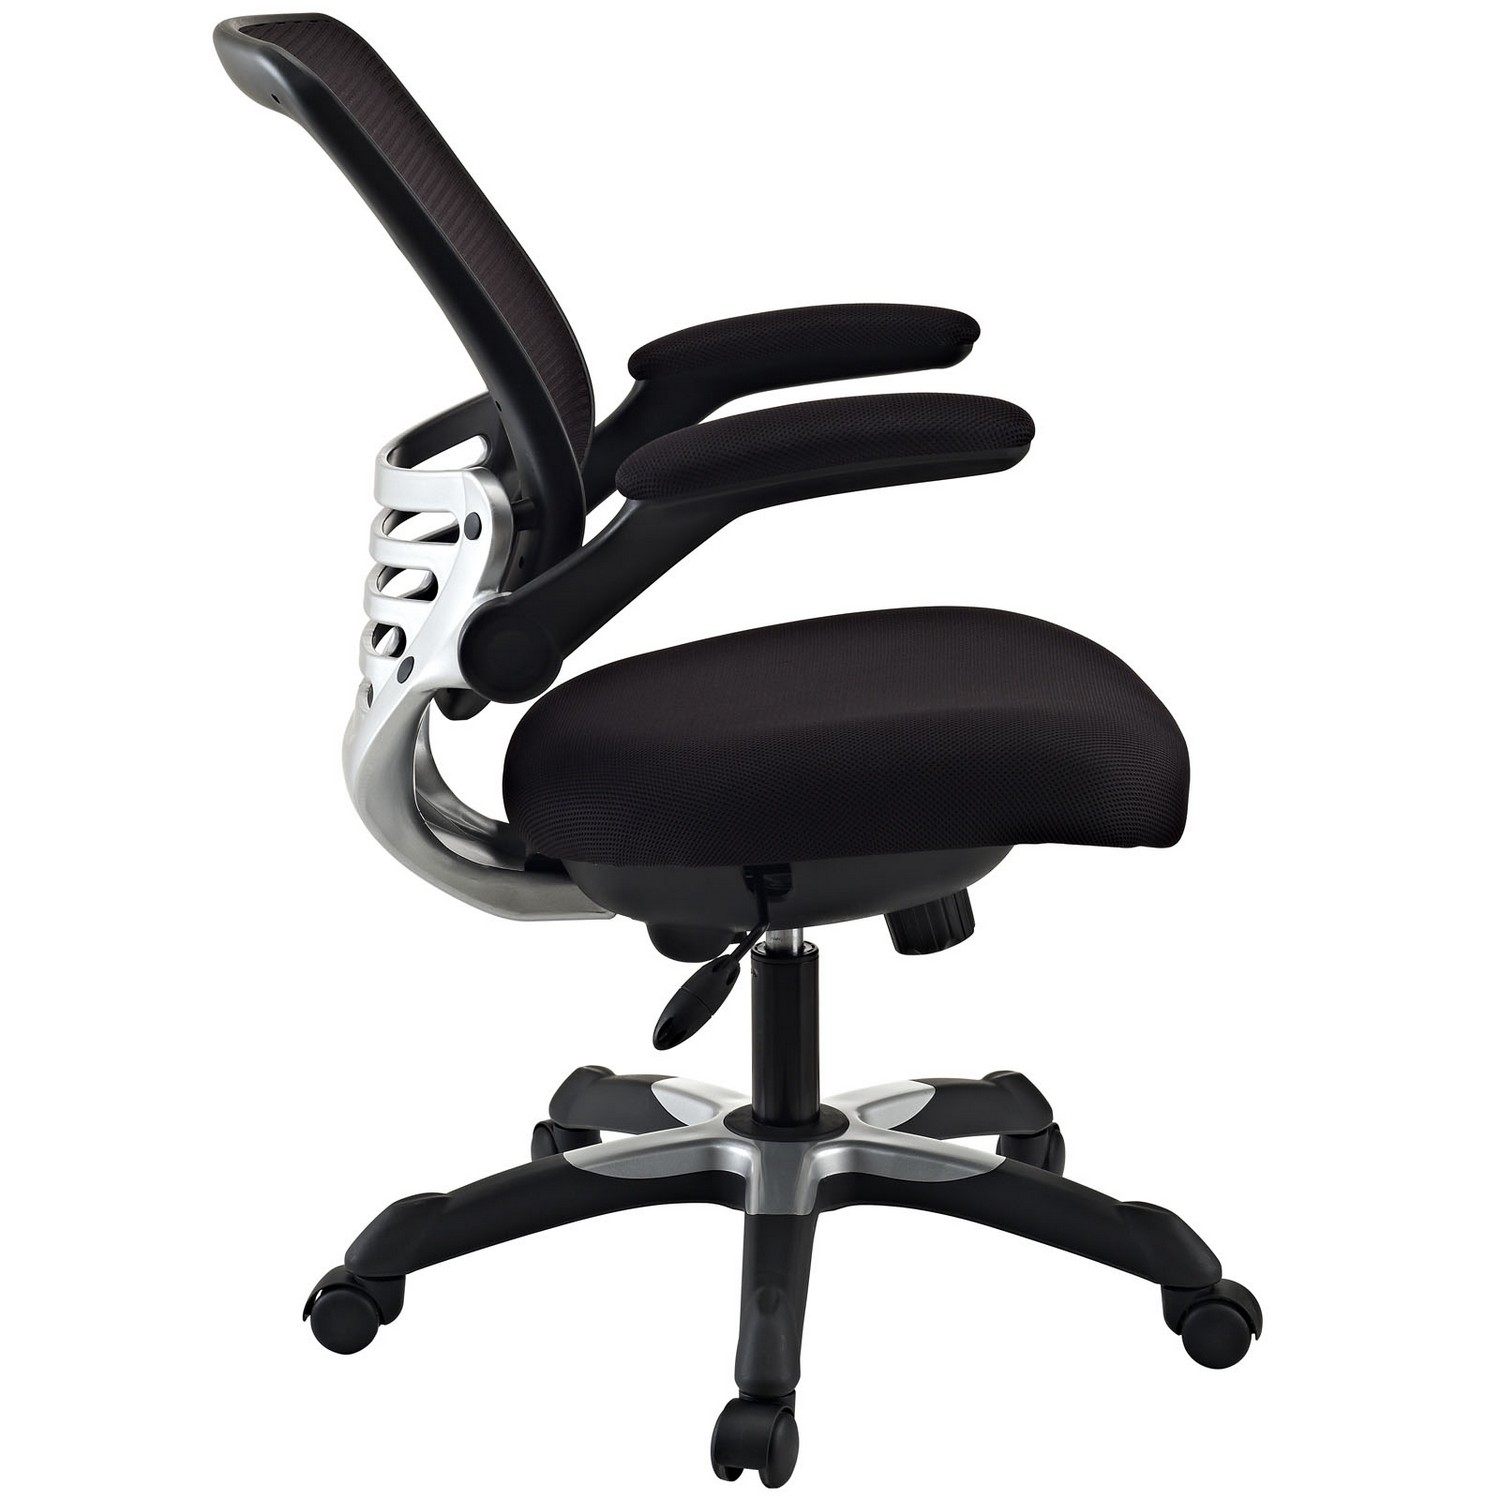 Modway Edge Office Chair - Black